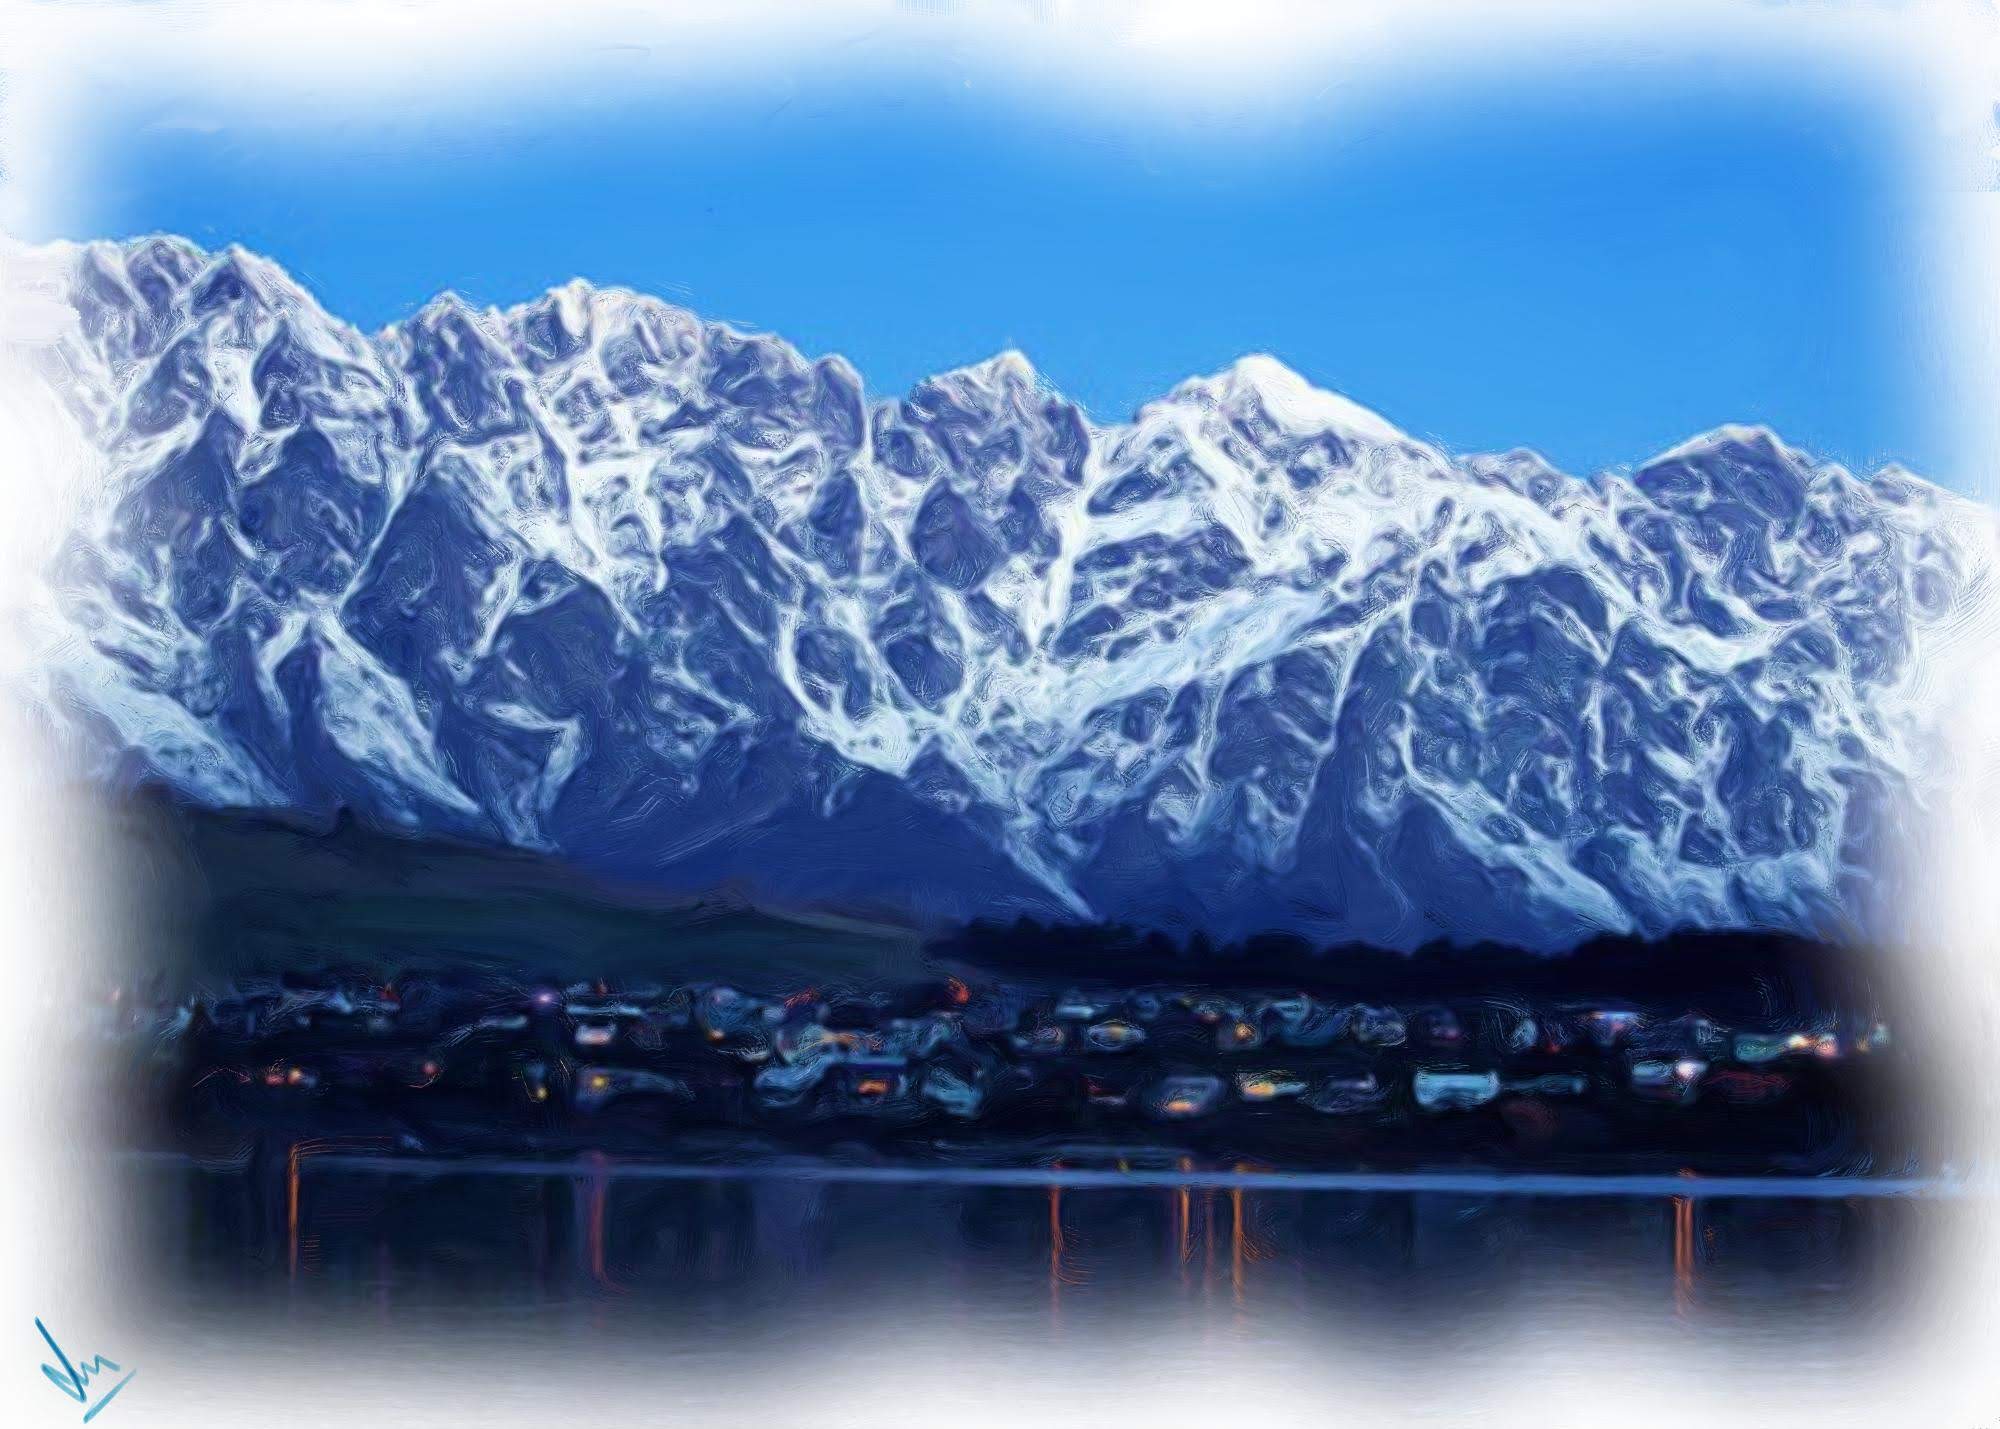 The Remarkables covered with snow in Winter - Digital Painting by Shaalyn Monteiro